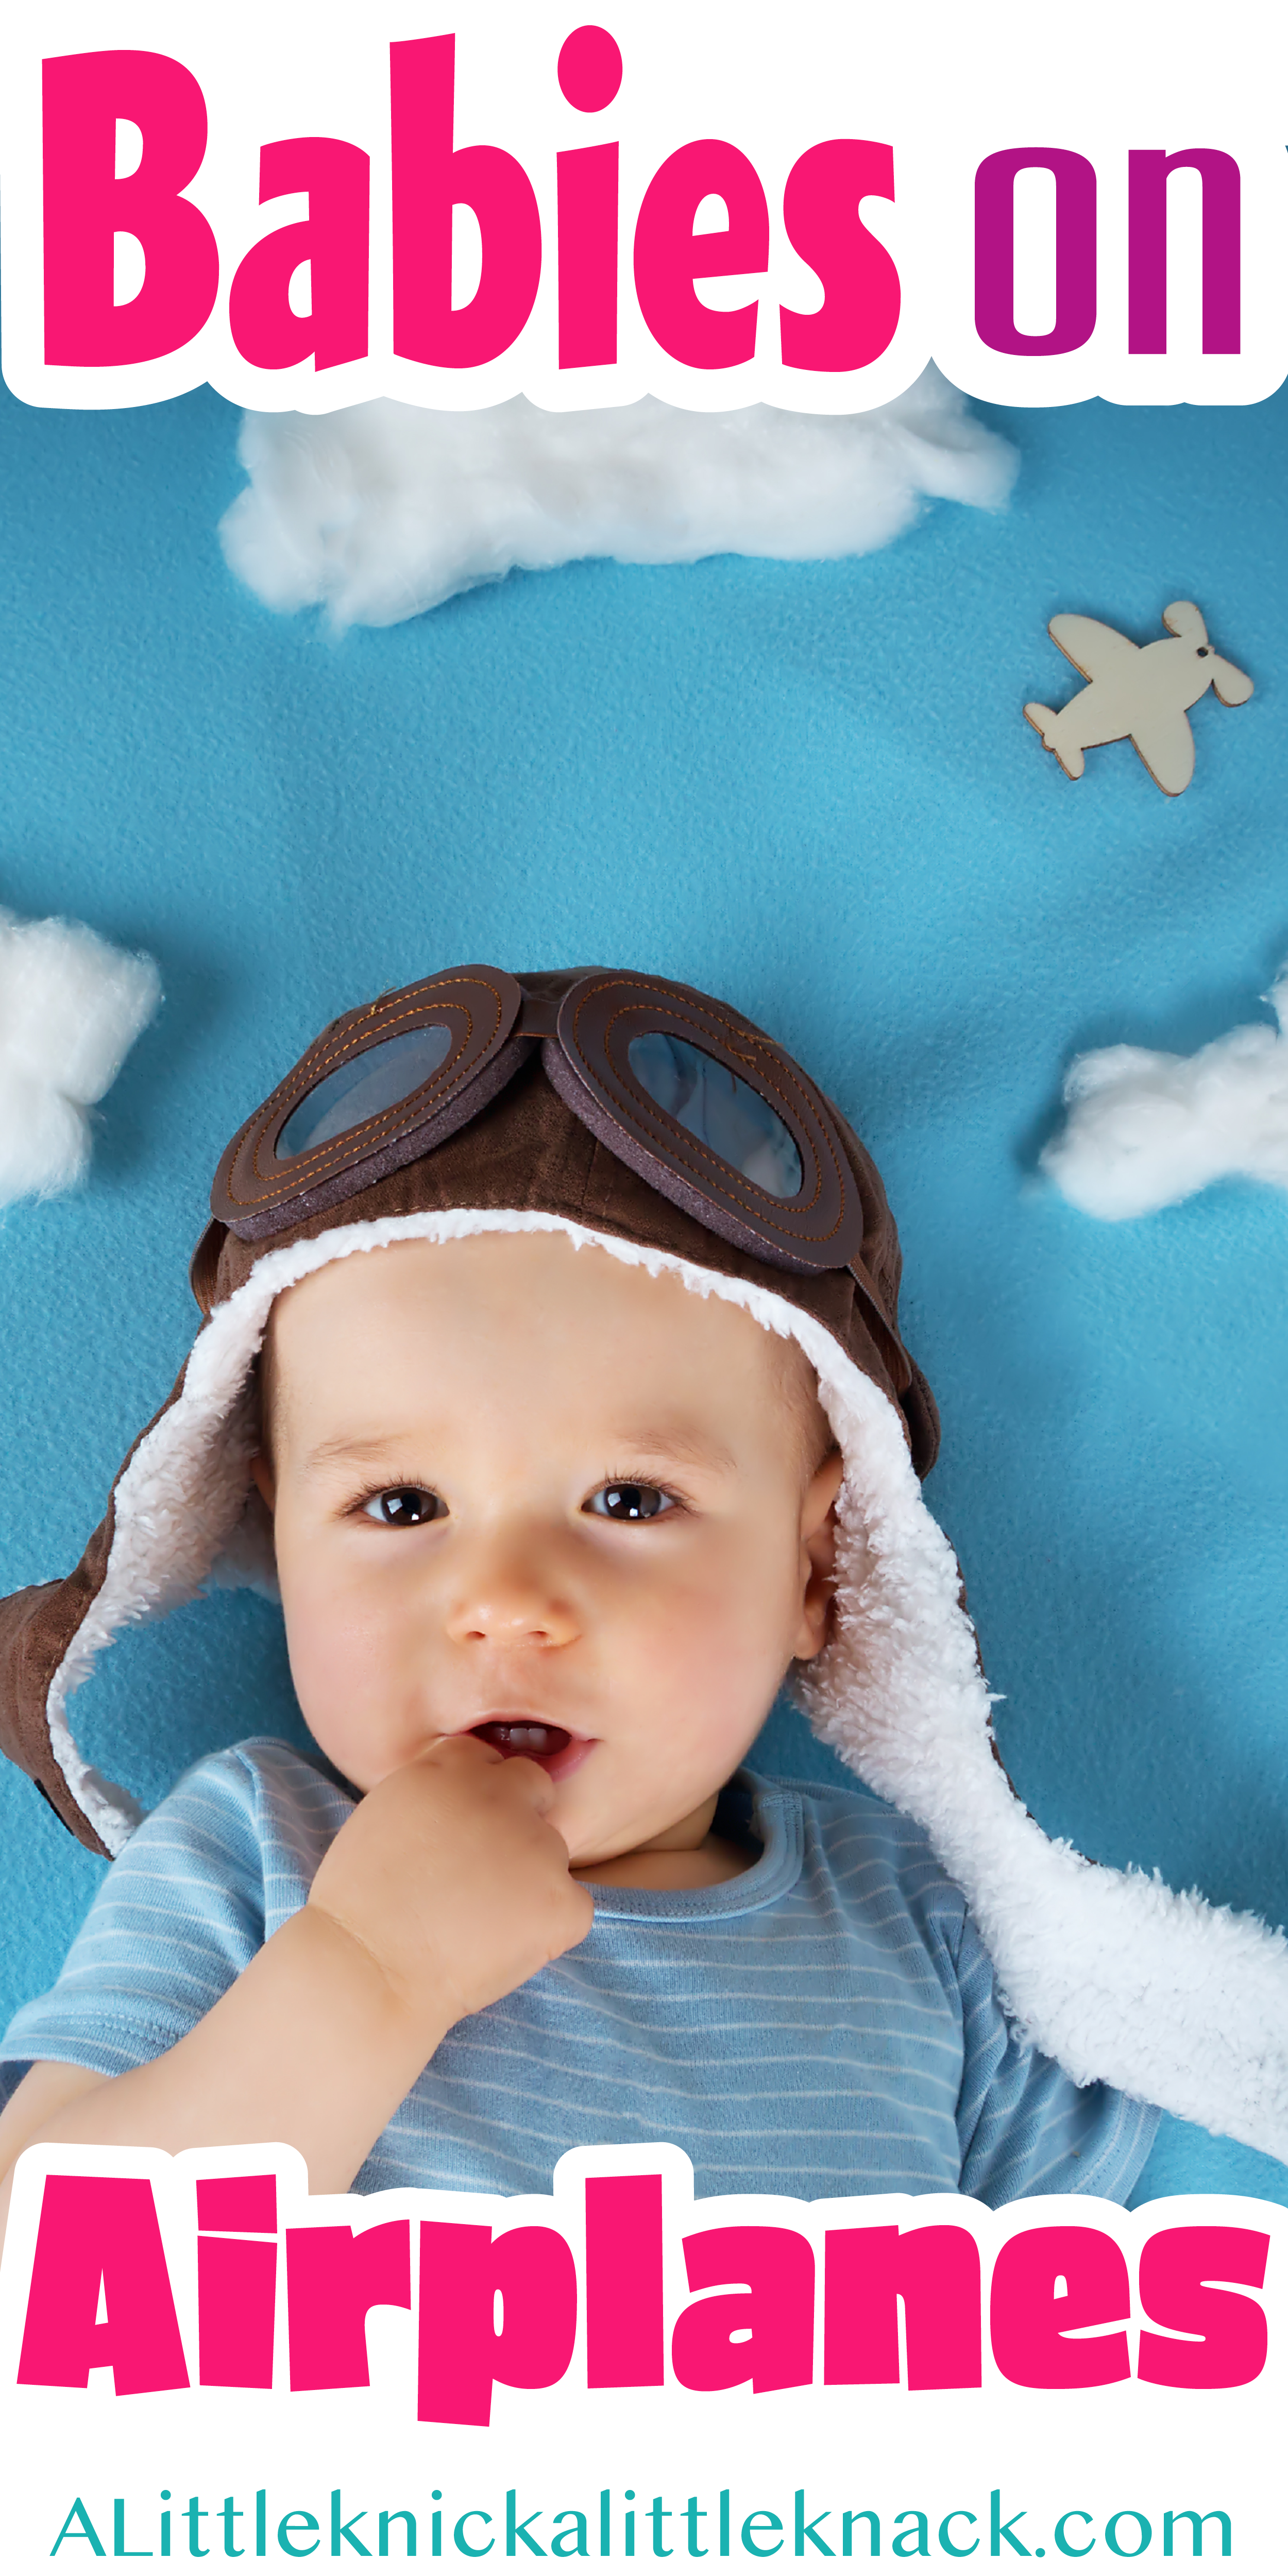 A baby wearing a pilot's hat against a blue "cartoon" sky with a text overlay